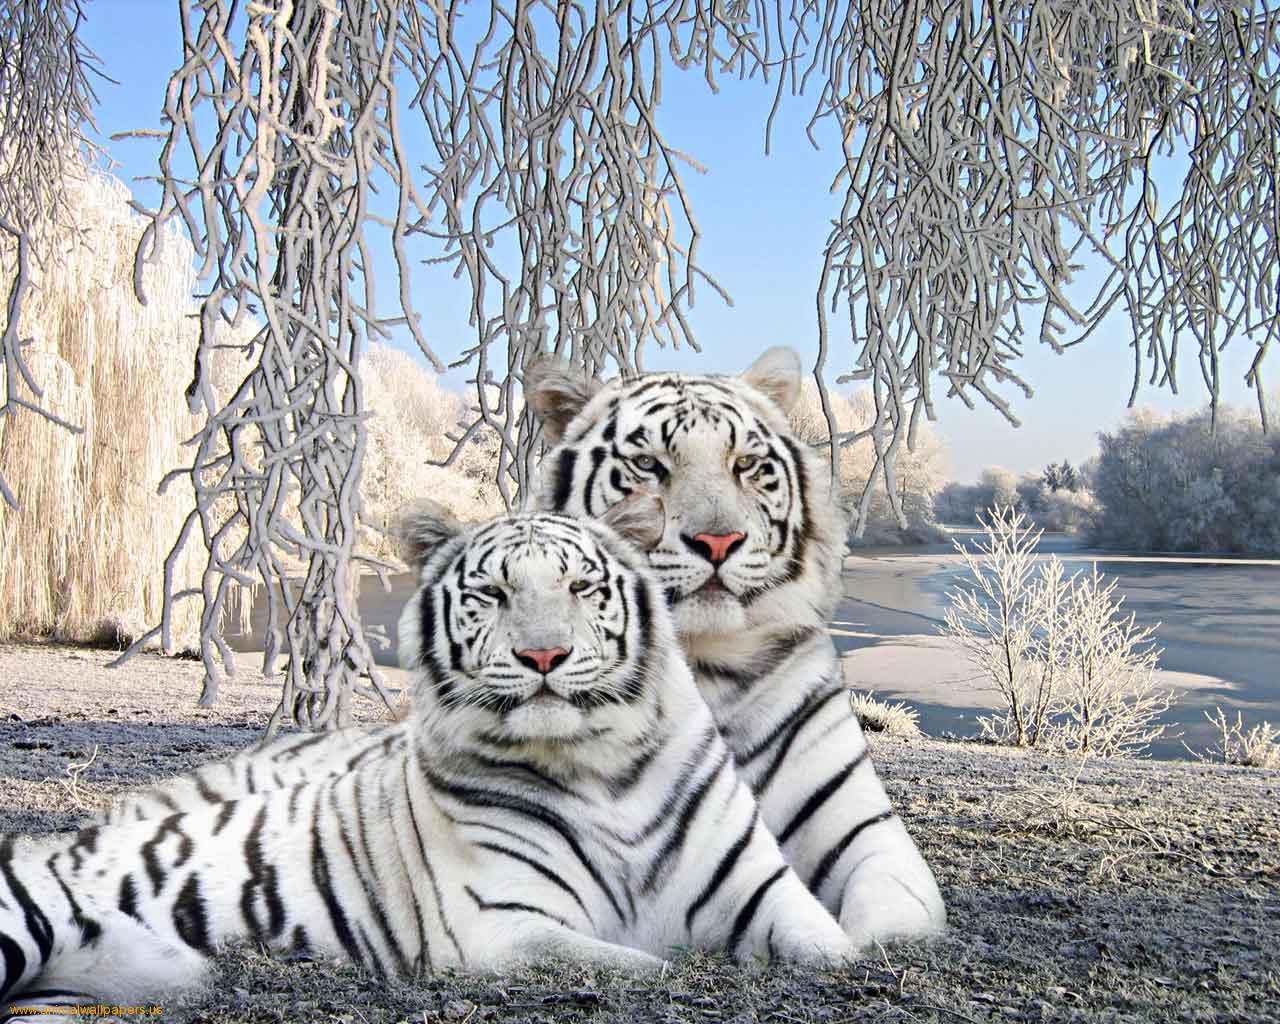 Baby White Tiger Wallpapers - Wallpaper Cave